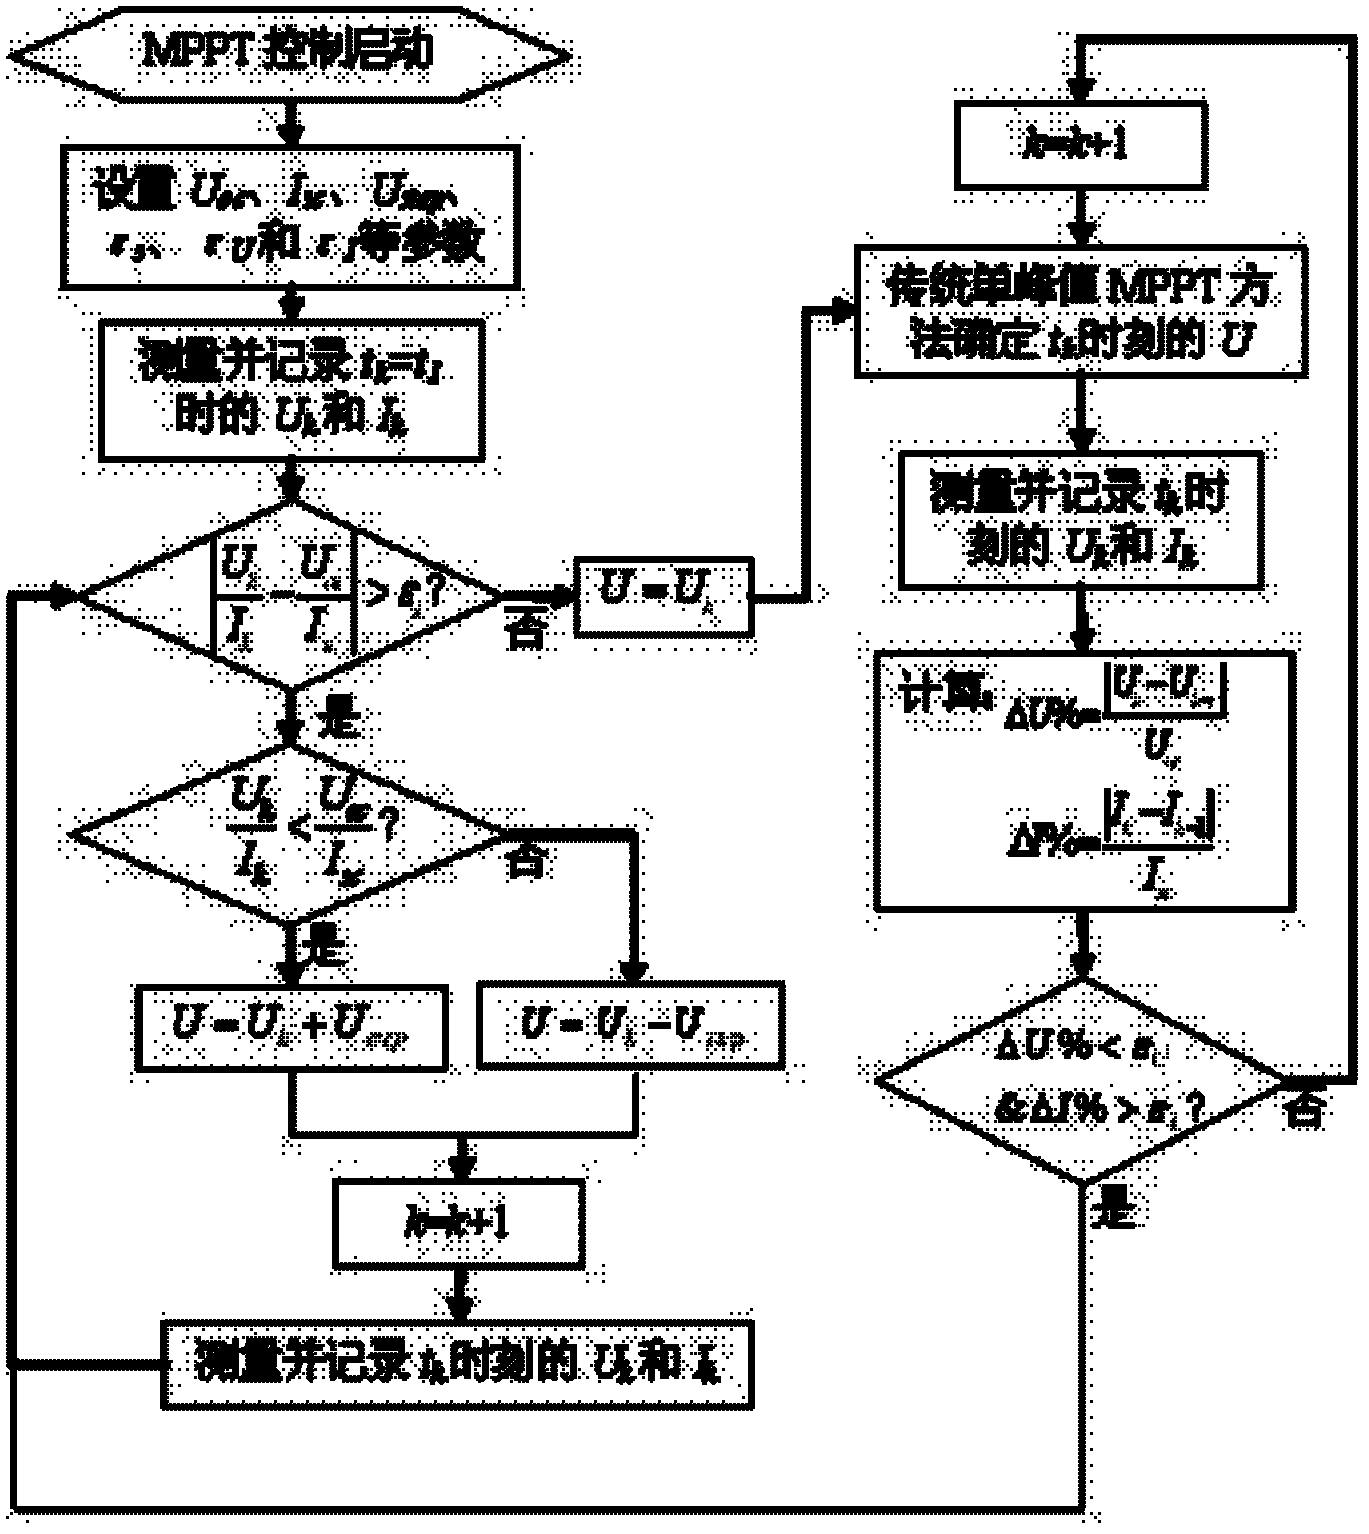 Control method for maximum power point tracking (MPPT) of photovoltaic array